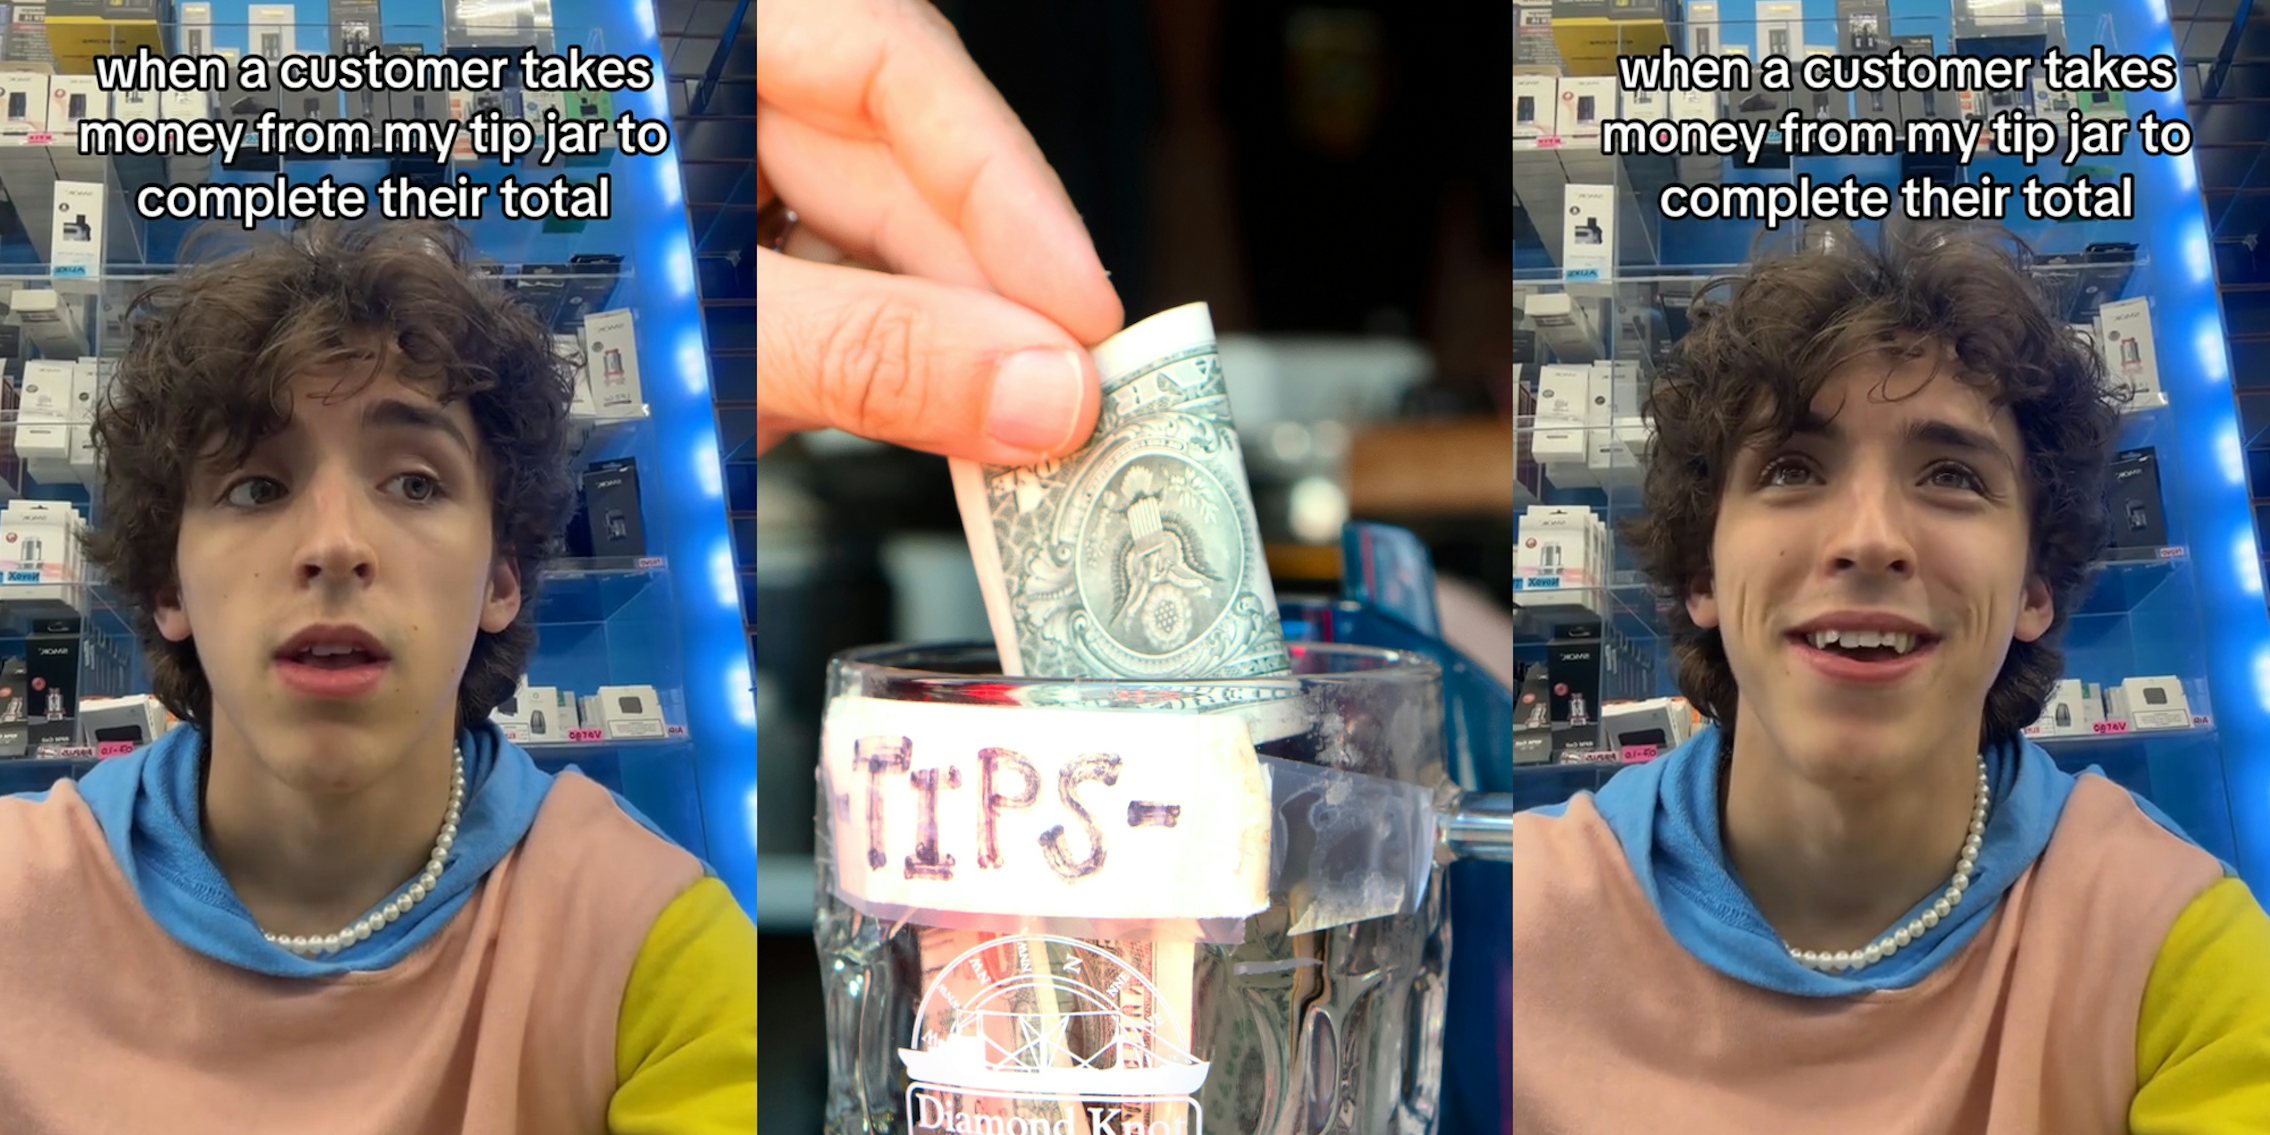 worker speaking with caption 'when a customer takes money from the tip jar to complete their total' (l) customer taking money from tip jar (c) worker speaking with caption 'when a customer takes money from the tip jar to complete their total' (r)